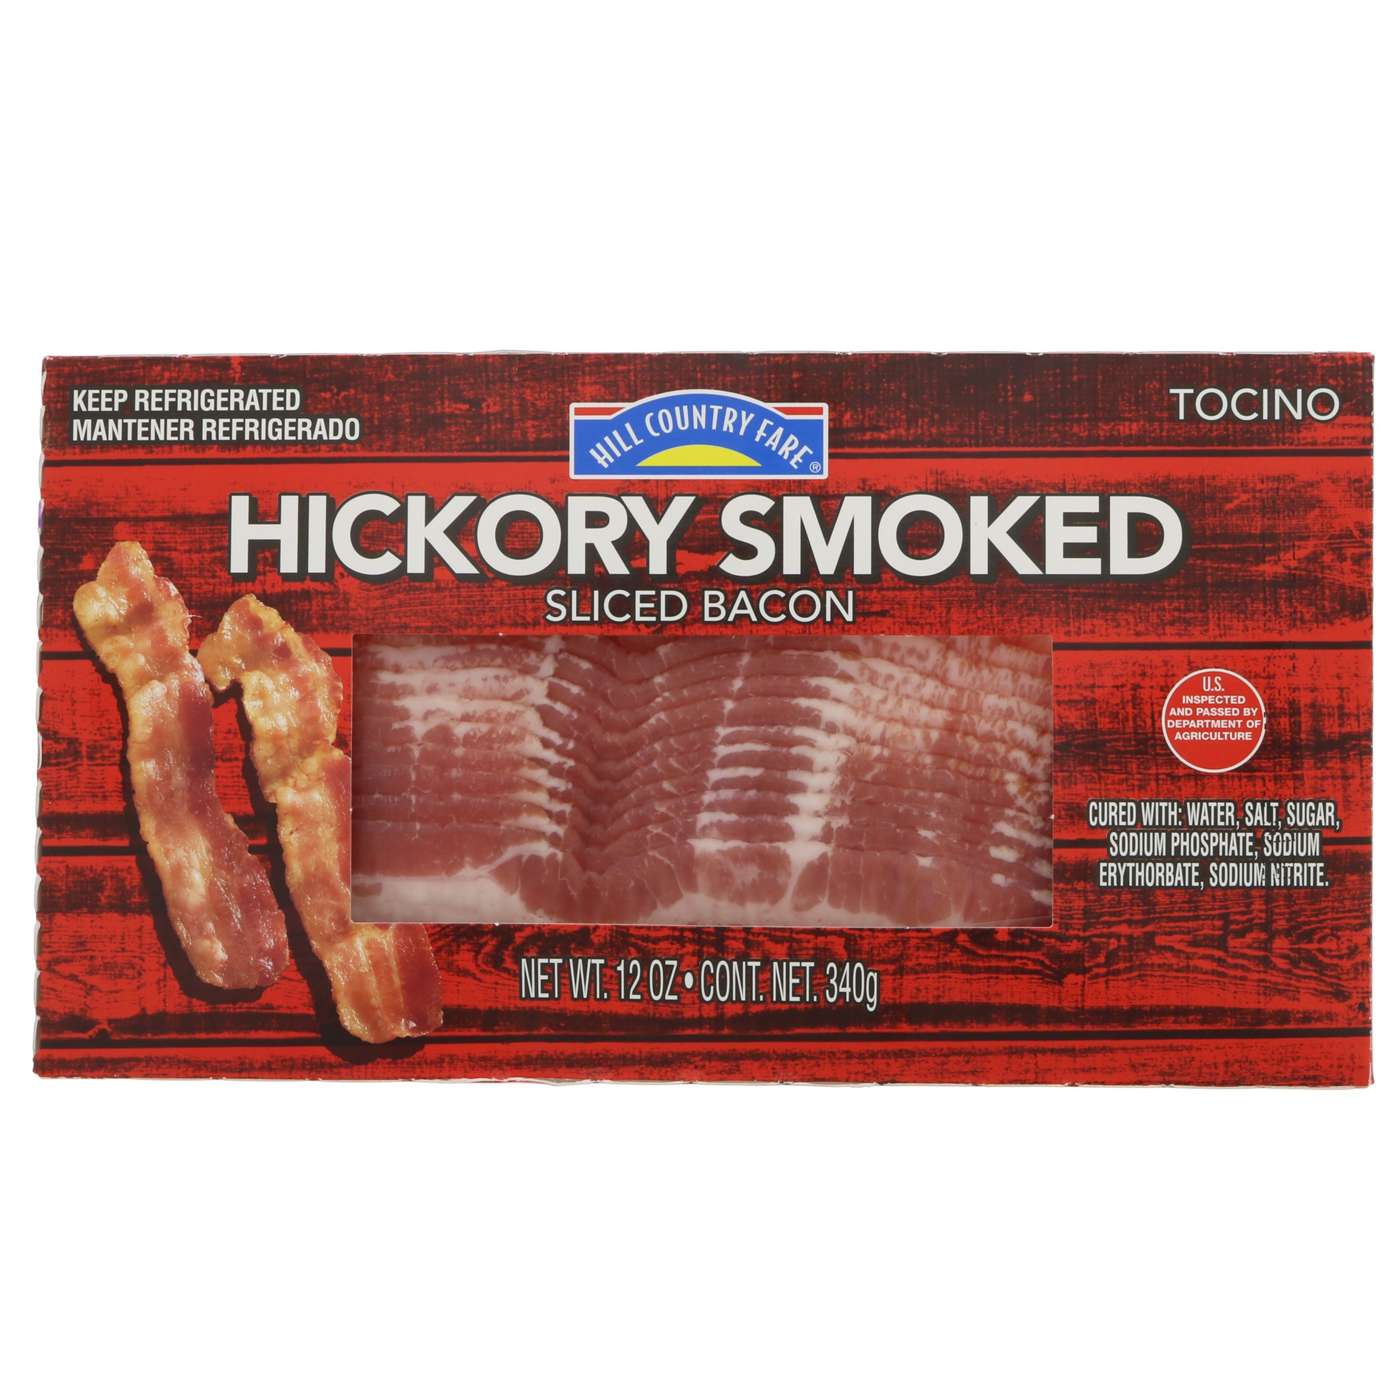 Hill Country Fare Hickory Smoked Sliced Bacon; image 1 of 2